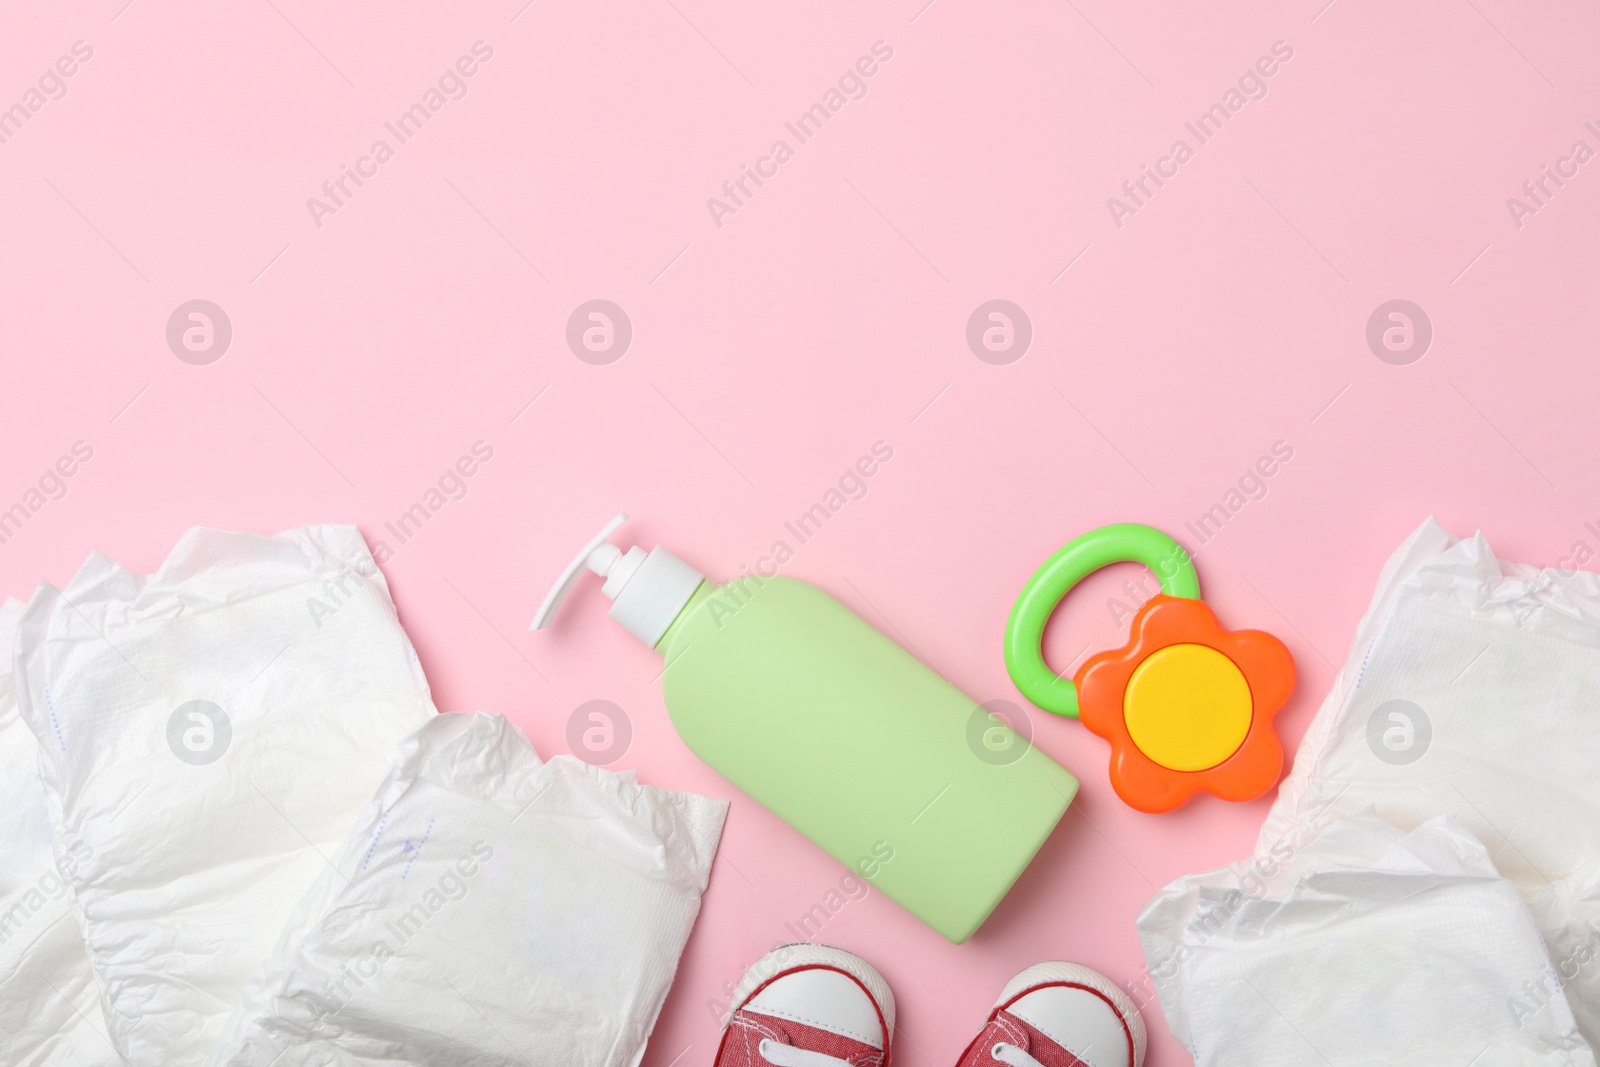 Photo of Diapers and baby accessories on pink background, flat lay. Space for text